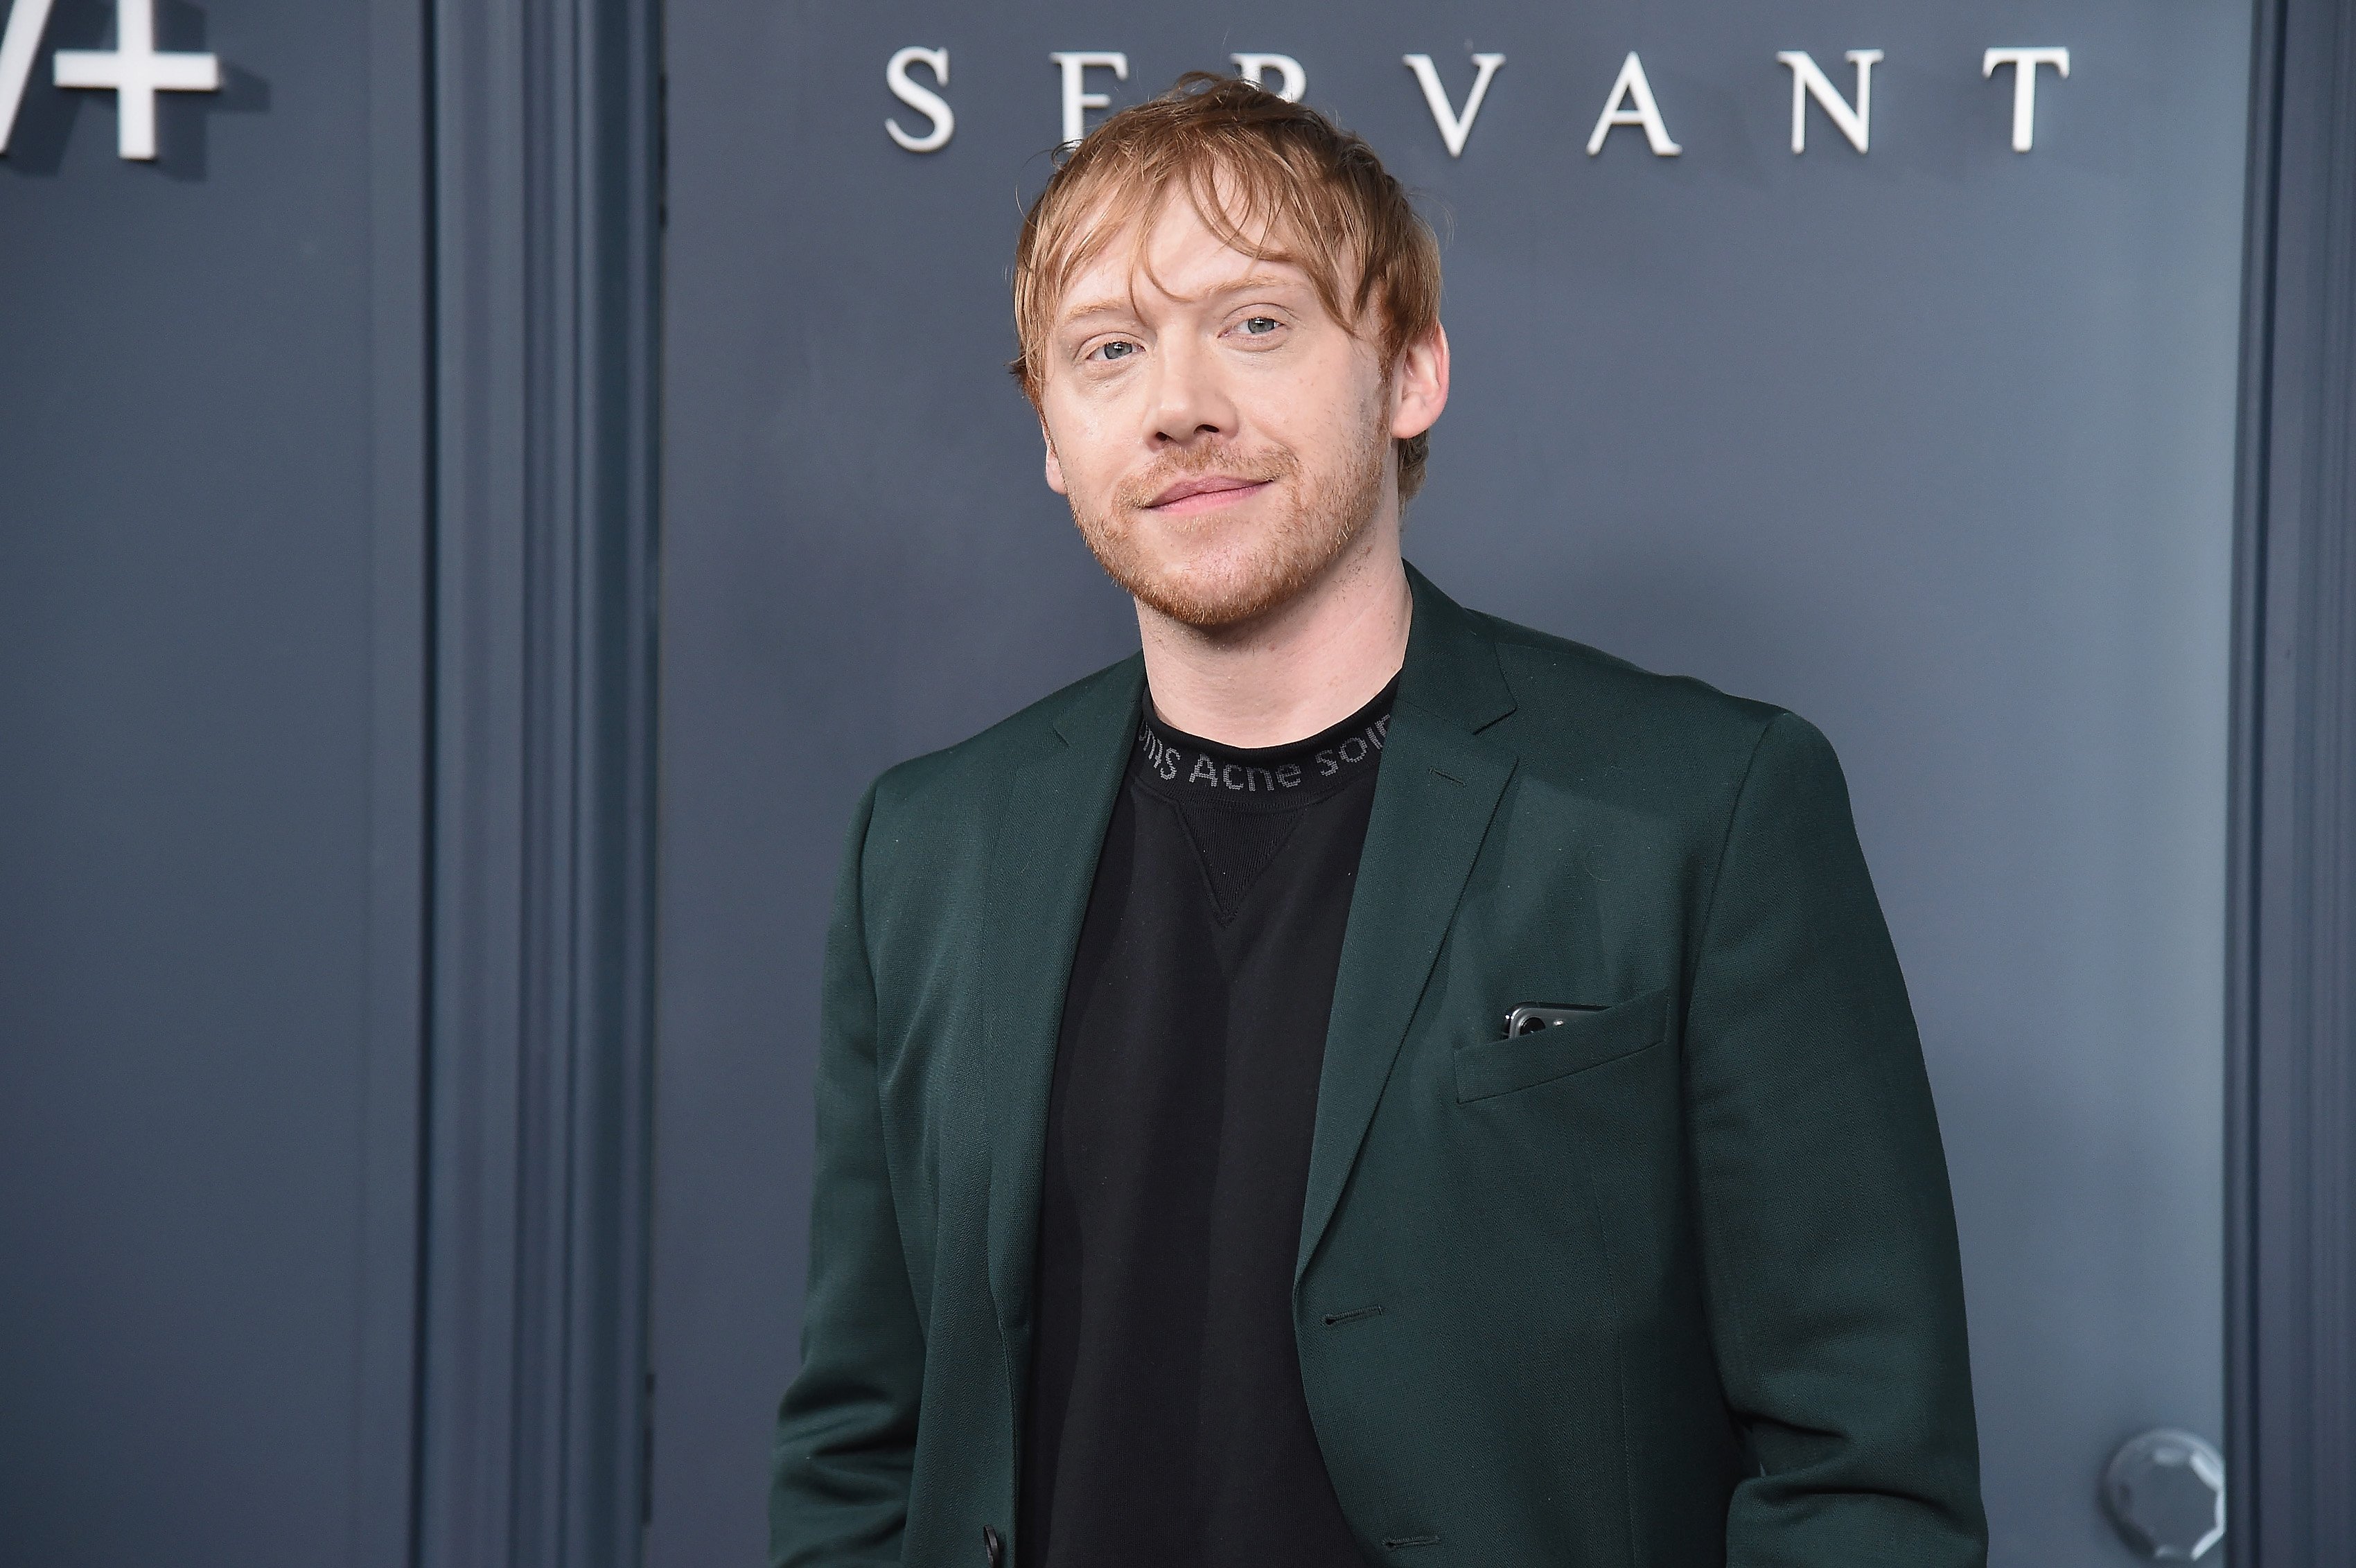 Rupert Grint attends Apple TV+'s "Servant" World Premiere at BAM Howard Gilman Opera House on November 19, 2019, in New York City. | Source: Getty Images